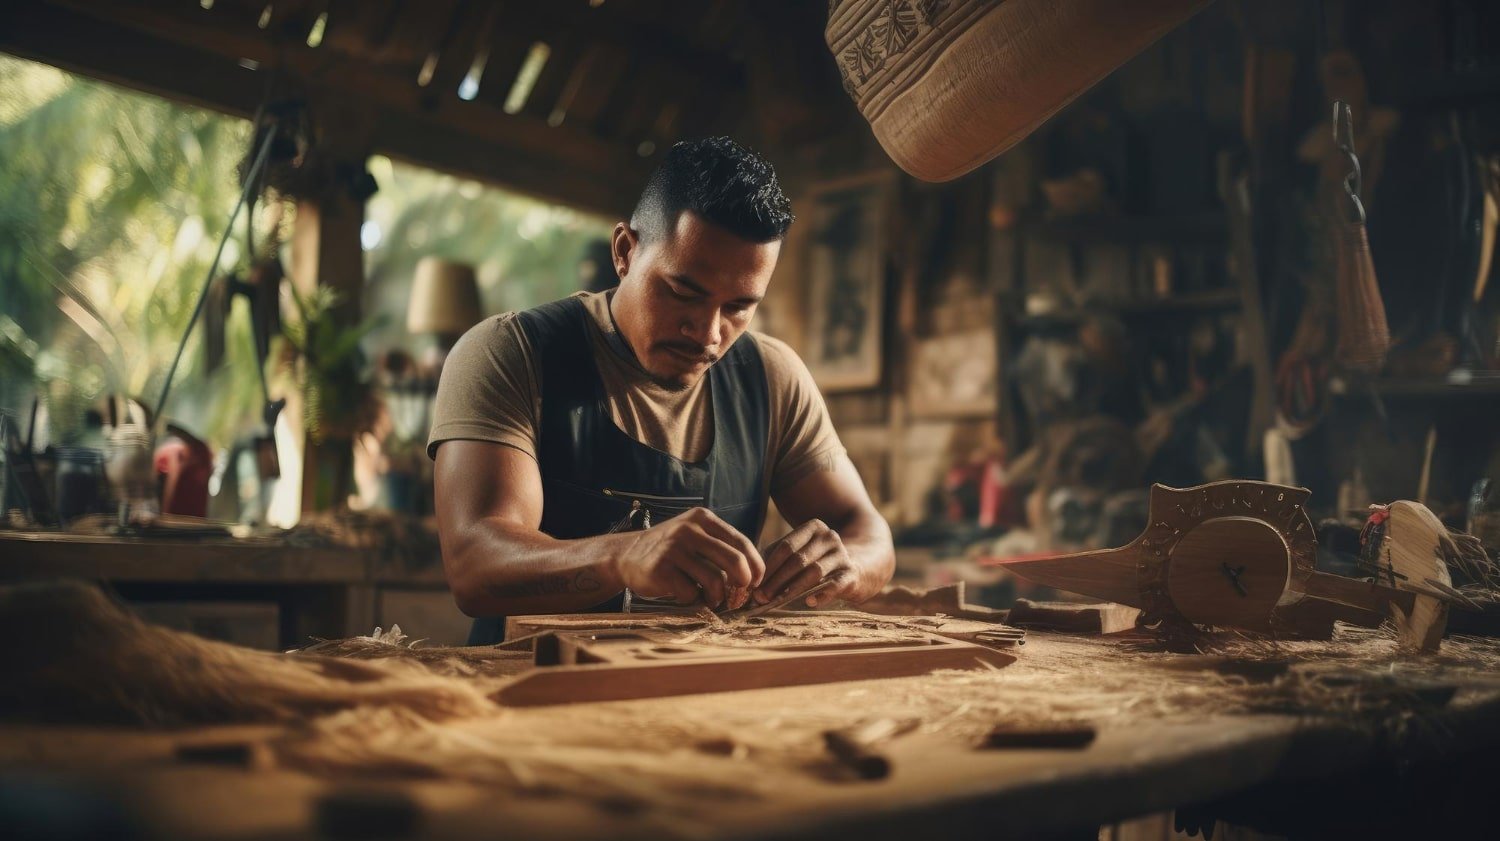 You are currently viewing Woodcraft Crafting Excellence in Woodworking